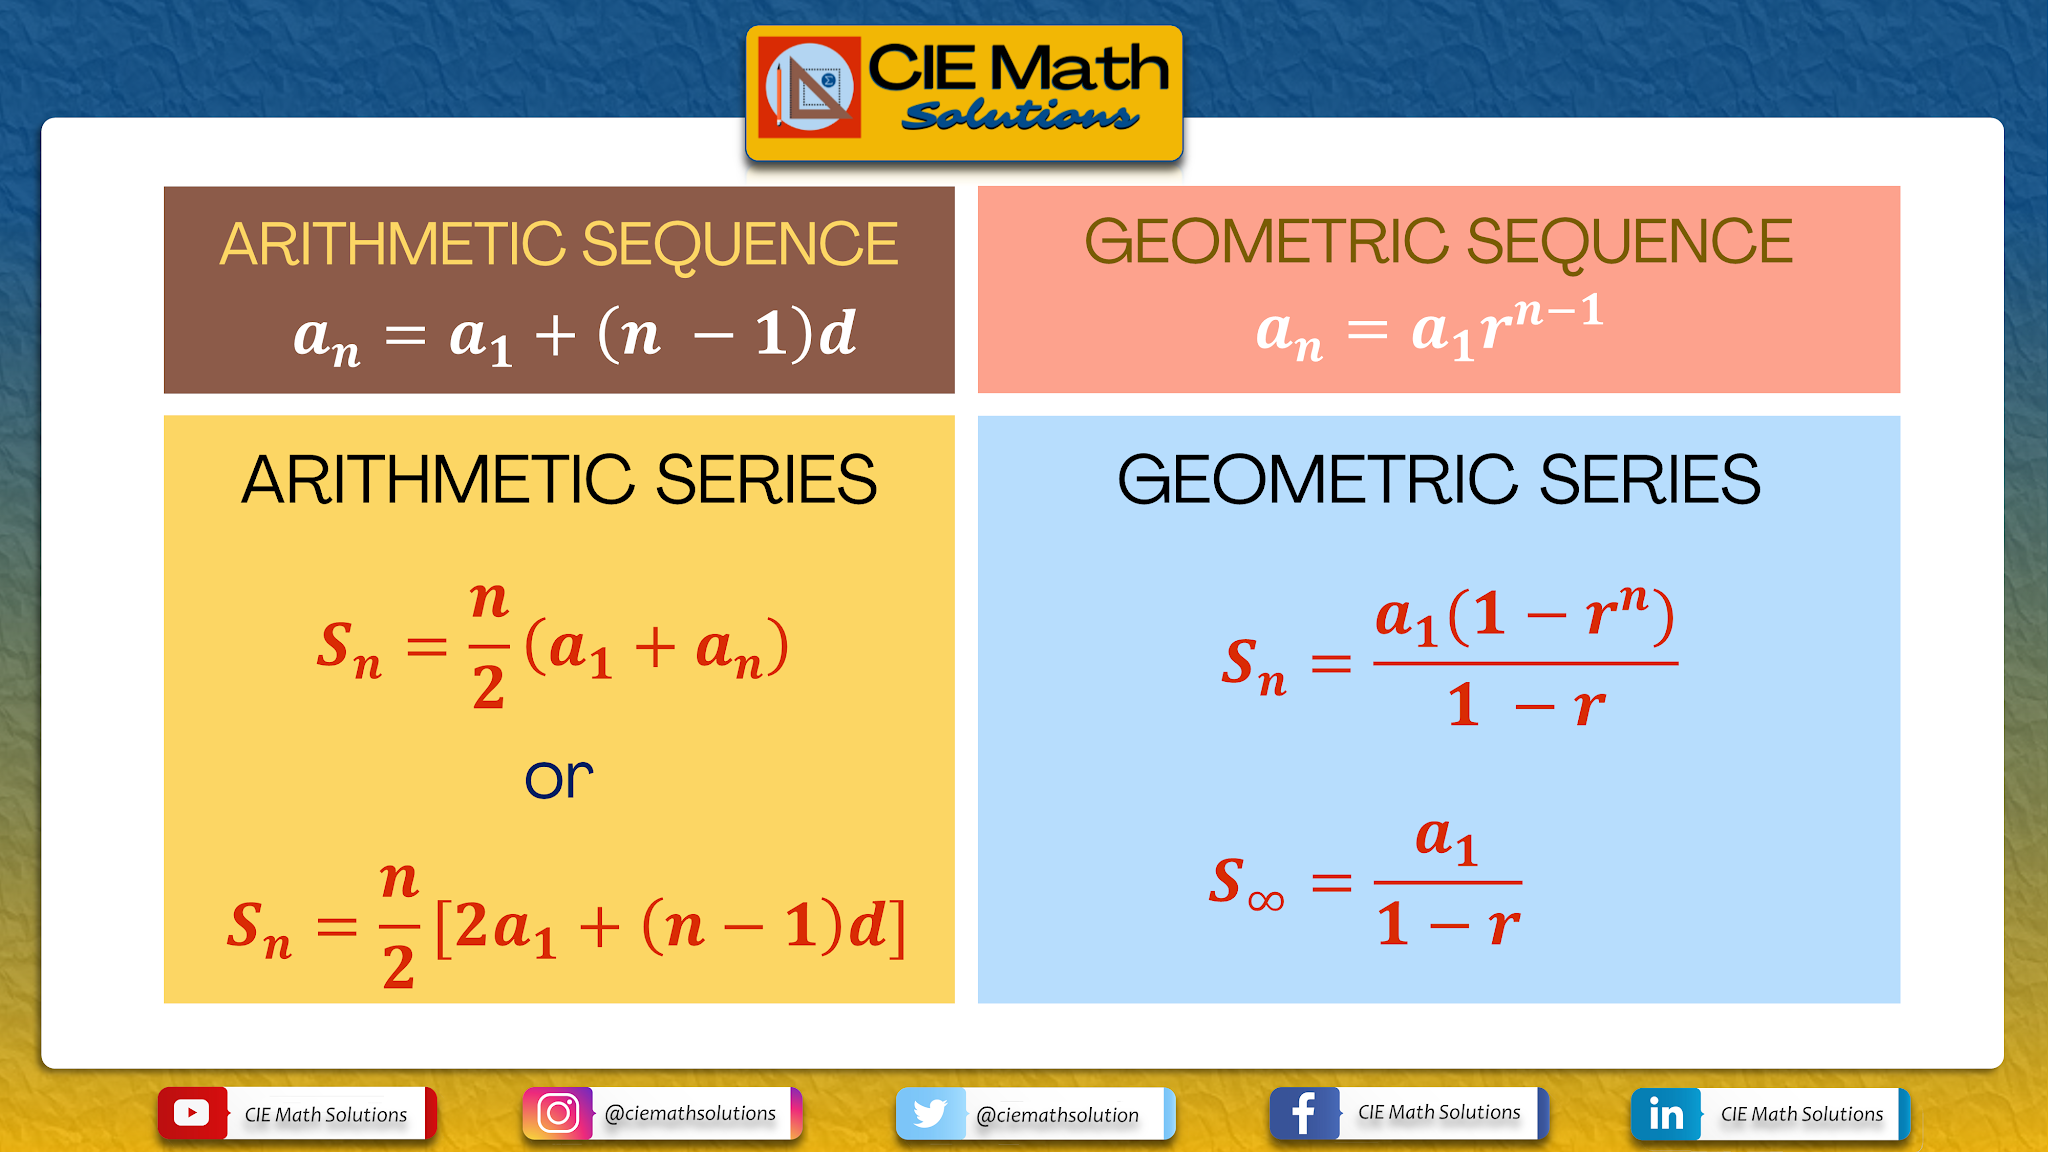 Past Paper Items on Arithmetic and Geometric Sequences and Series - CIE